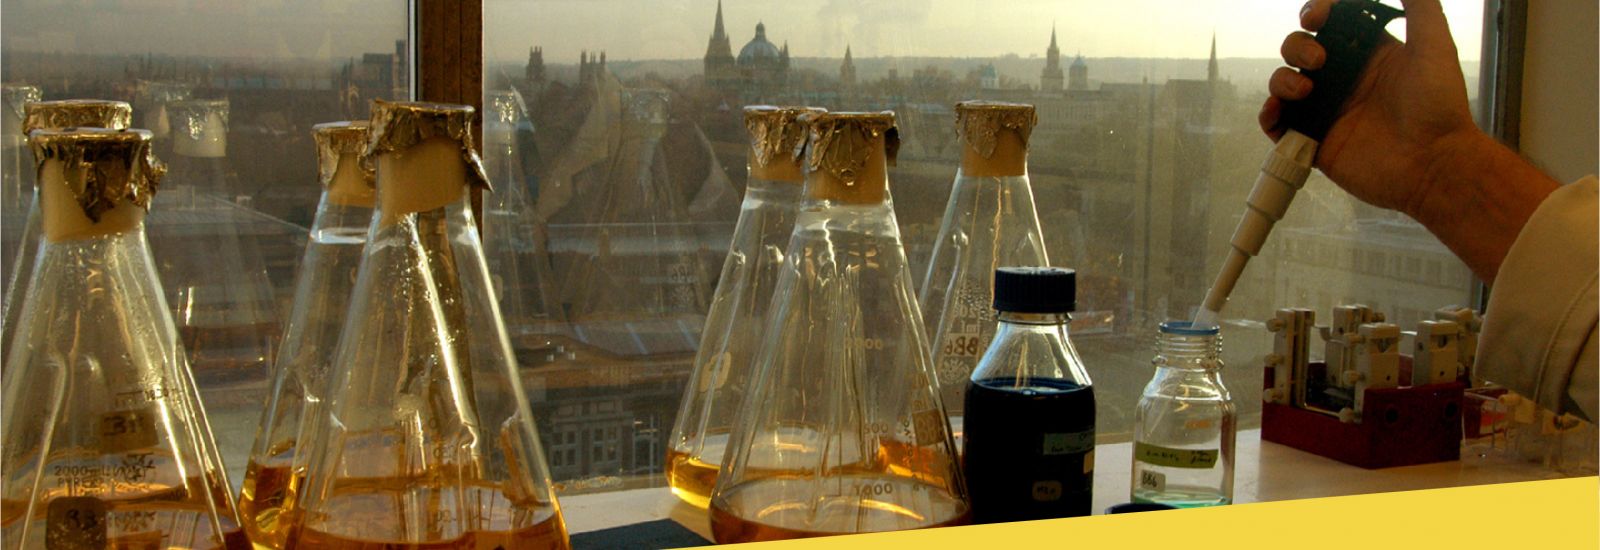 Conical flasks in a Chemistry lab in front of a window overlooking Oxford city centre